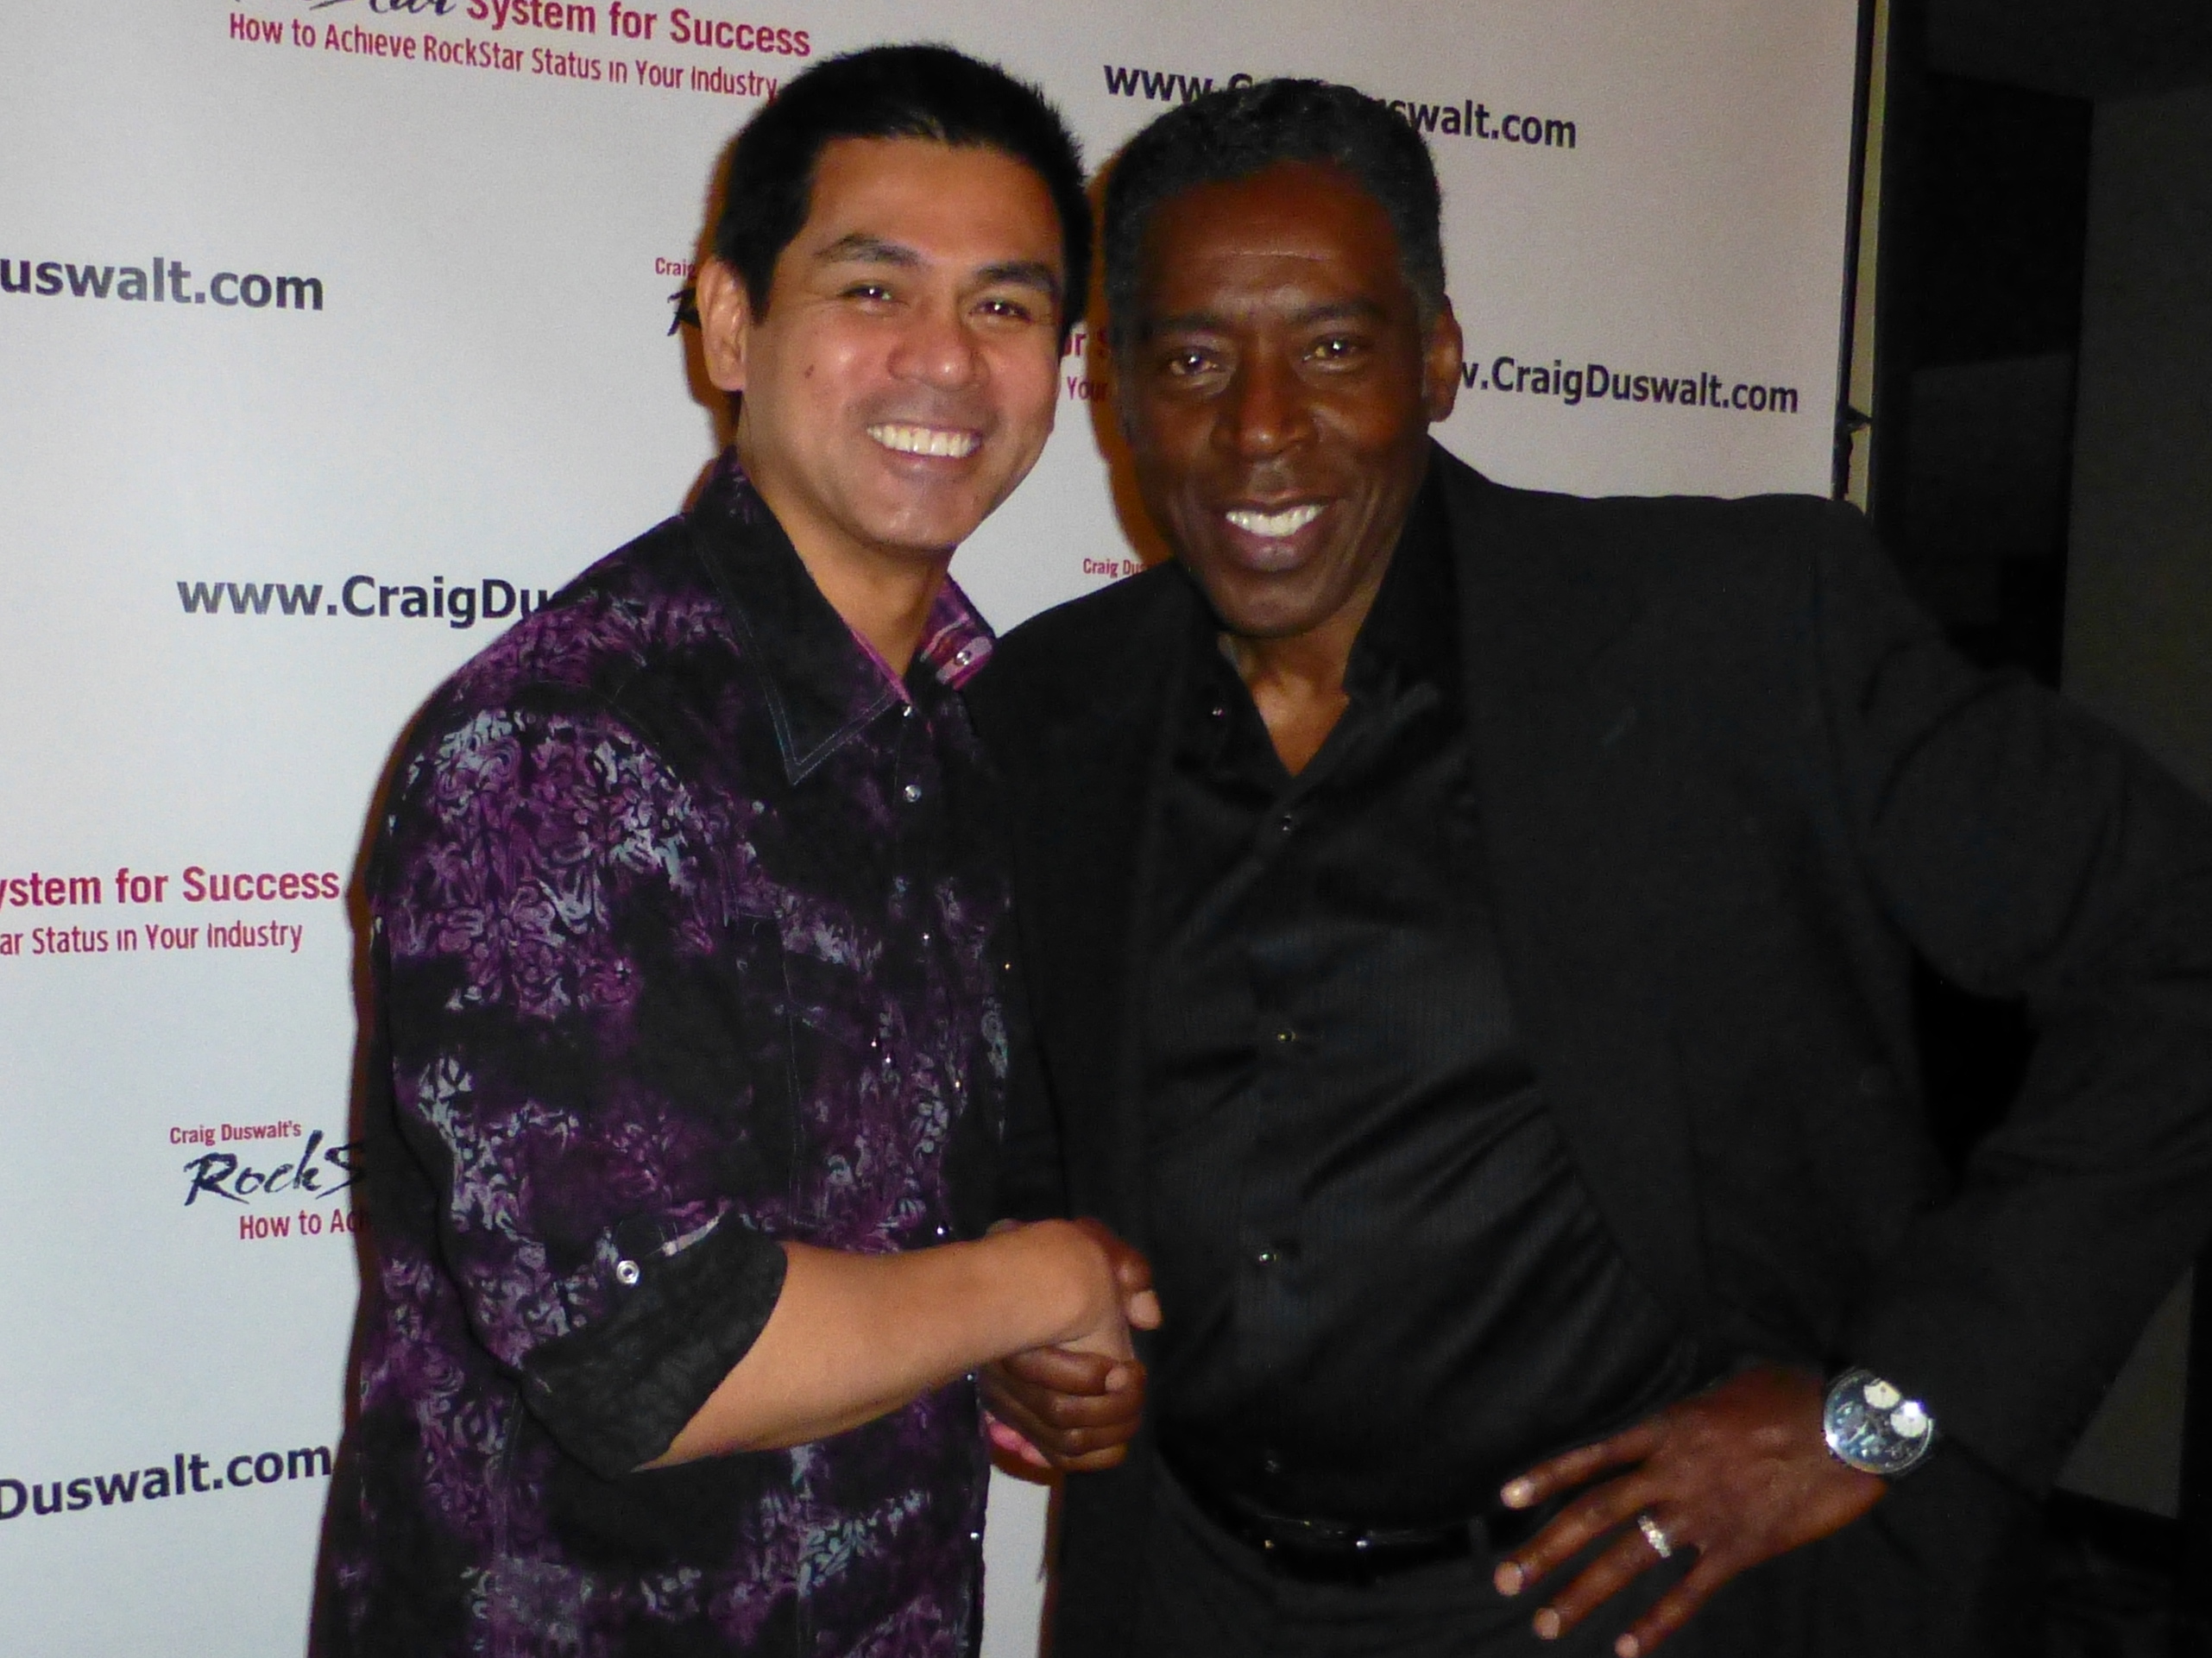 Ernie Hudson of films Ghostbusters, The Crow and TV show Oz at Craig Duswalt's Marketing Bootcamp